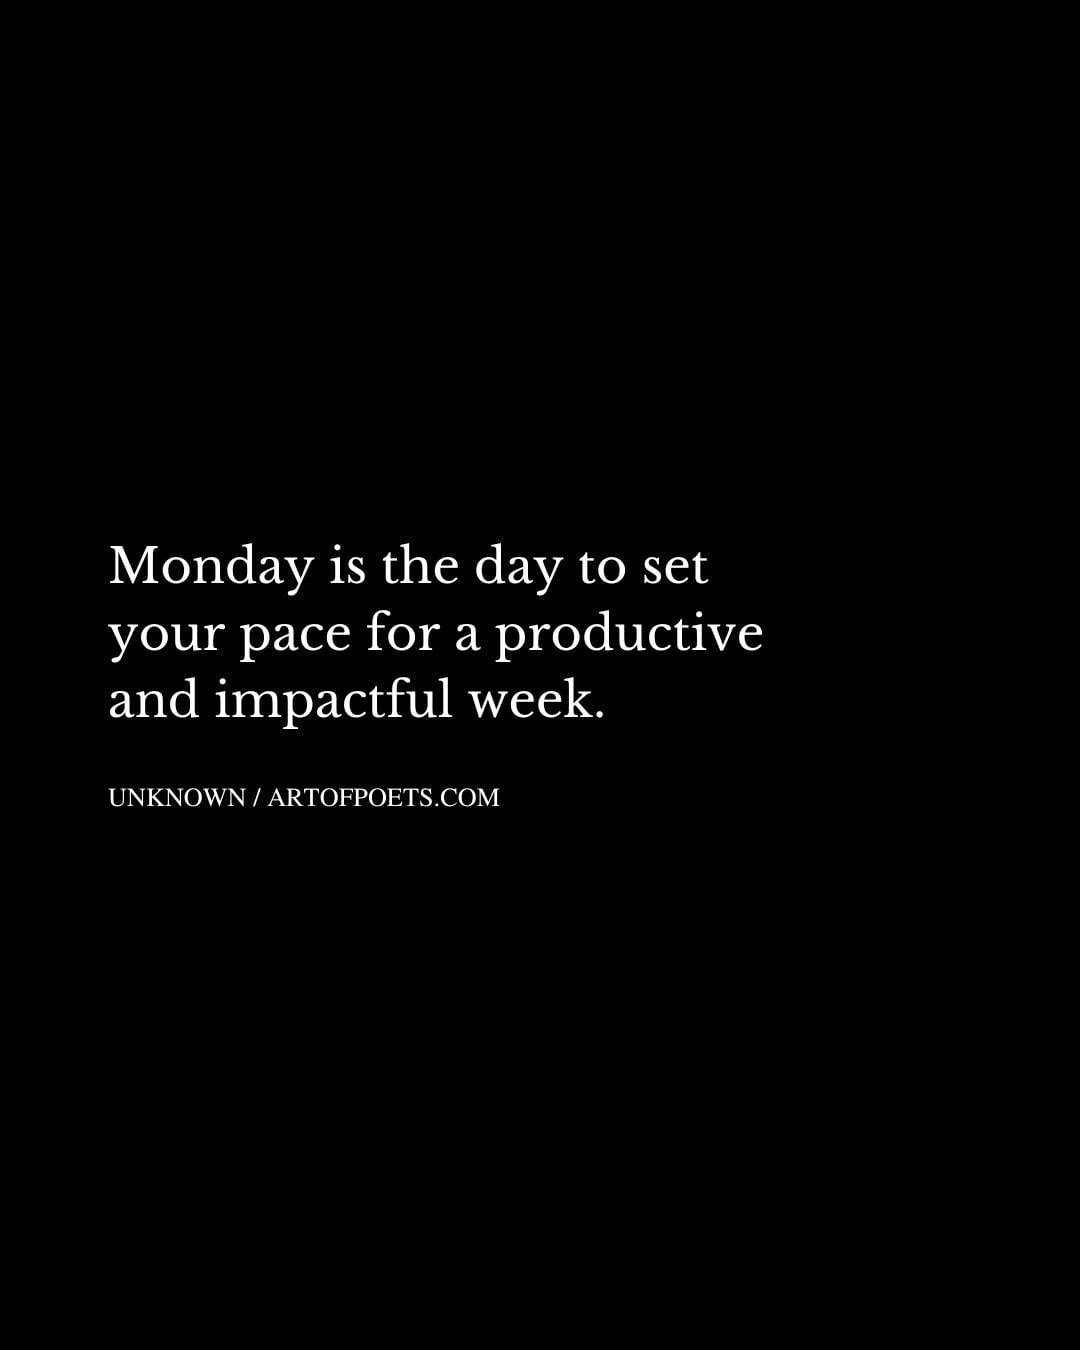 Monday is the day to set your pace for a productive and impactful week